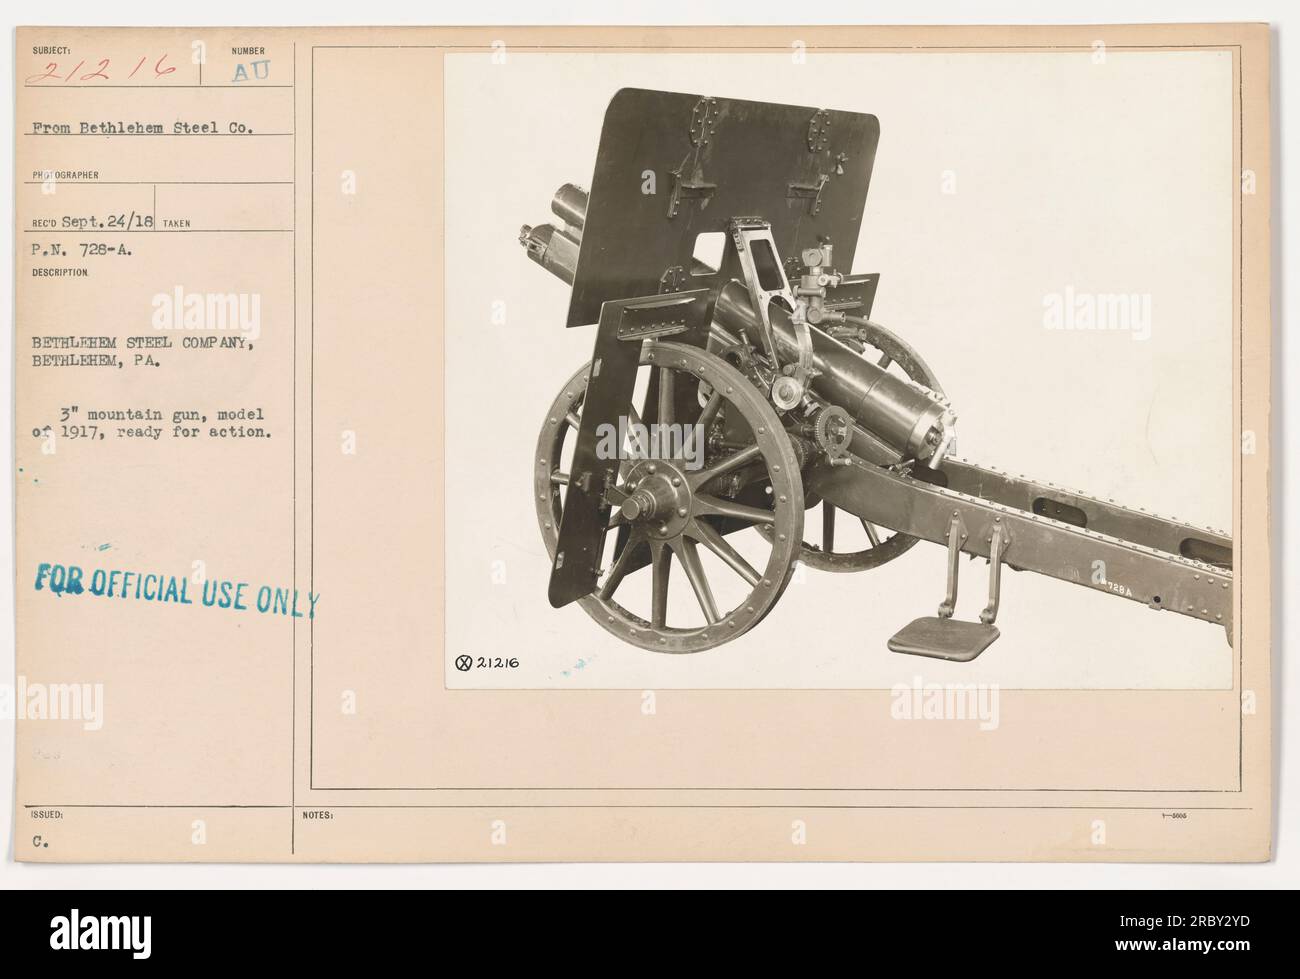 A 3' mountain gun, model of 1917, manufactured by Bethlehem Steel Company in Bethlehem, Pennsylvania, is seen in this photograph. The gun is depicted as ready for action. The image is an official release and marked with the number 21216 and P.N. 728-A. It was received on September 24, 1918. Stock Photo